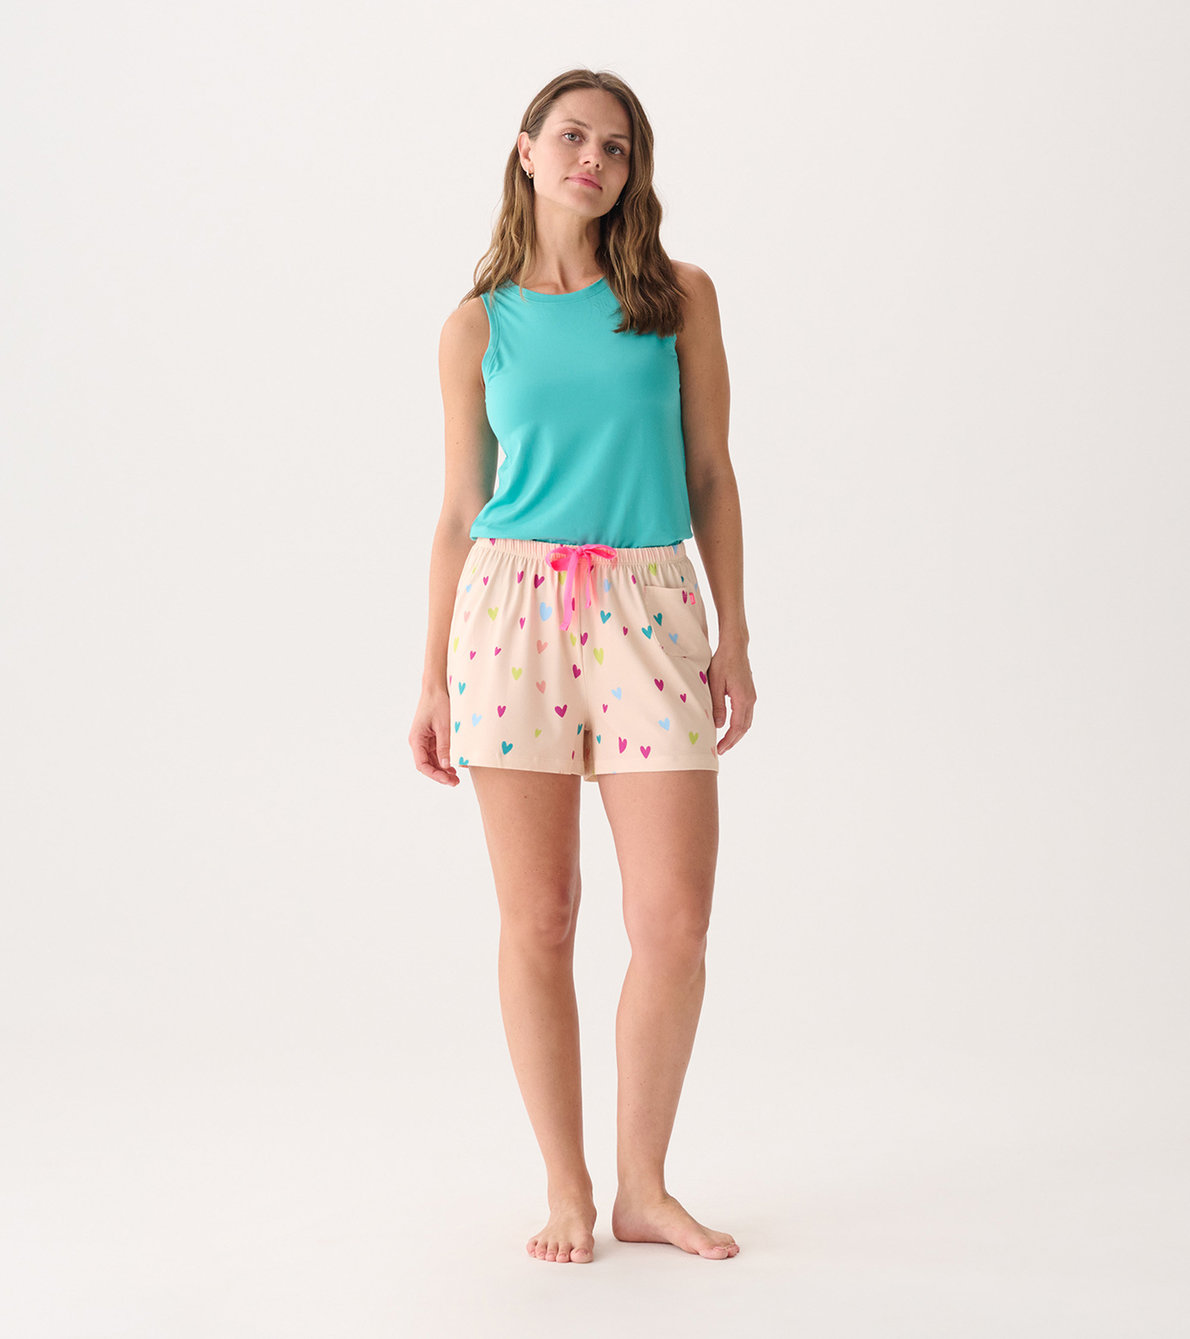 View larger image of Capelton Road Women's Jelly Bean Hearts Tank Top and Shorts